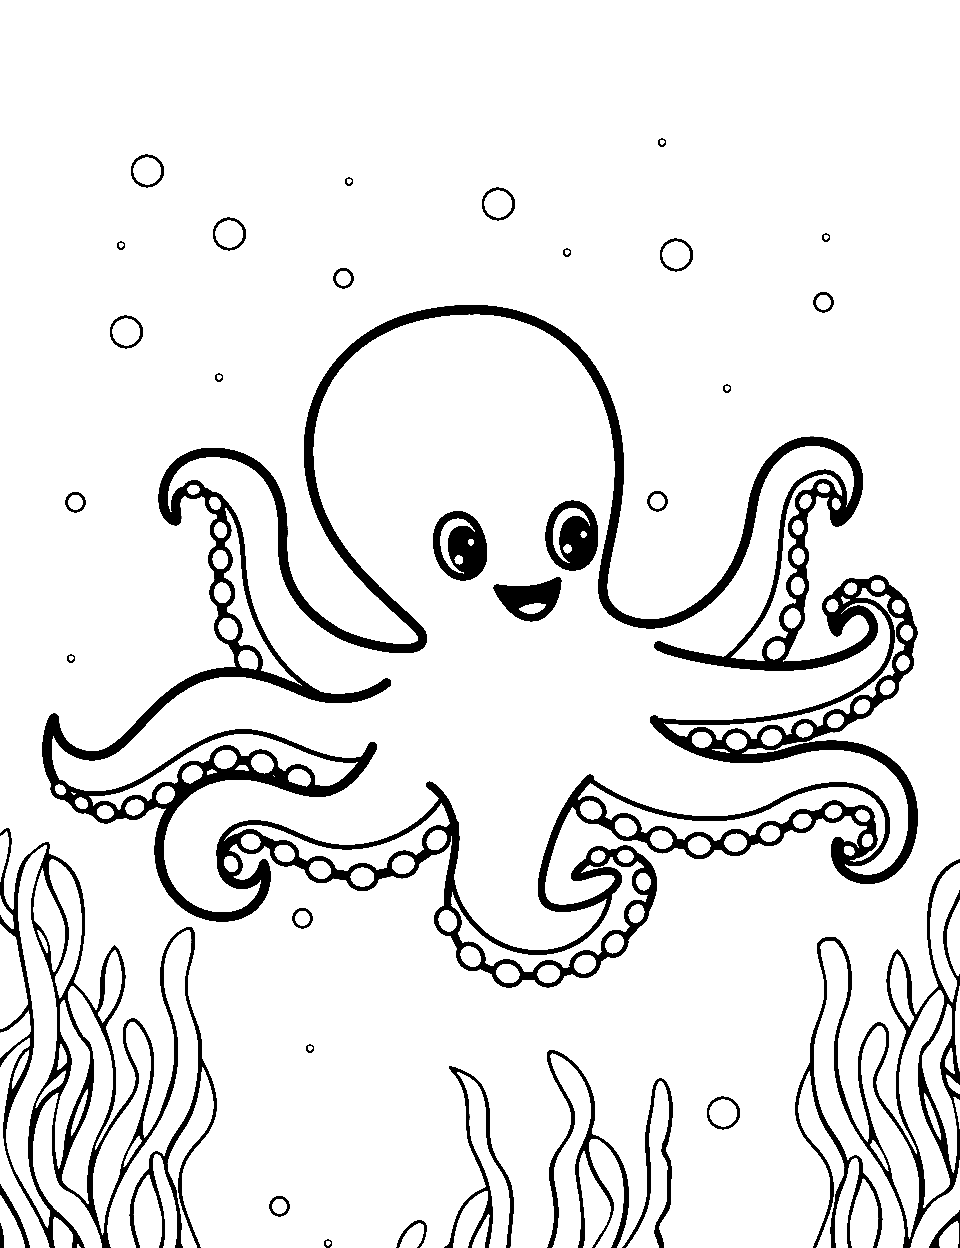 Advanced Octopus Challenge Ocean Coloring Page - An octopus with its tentacles spread out, showing suction cups.